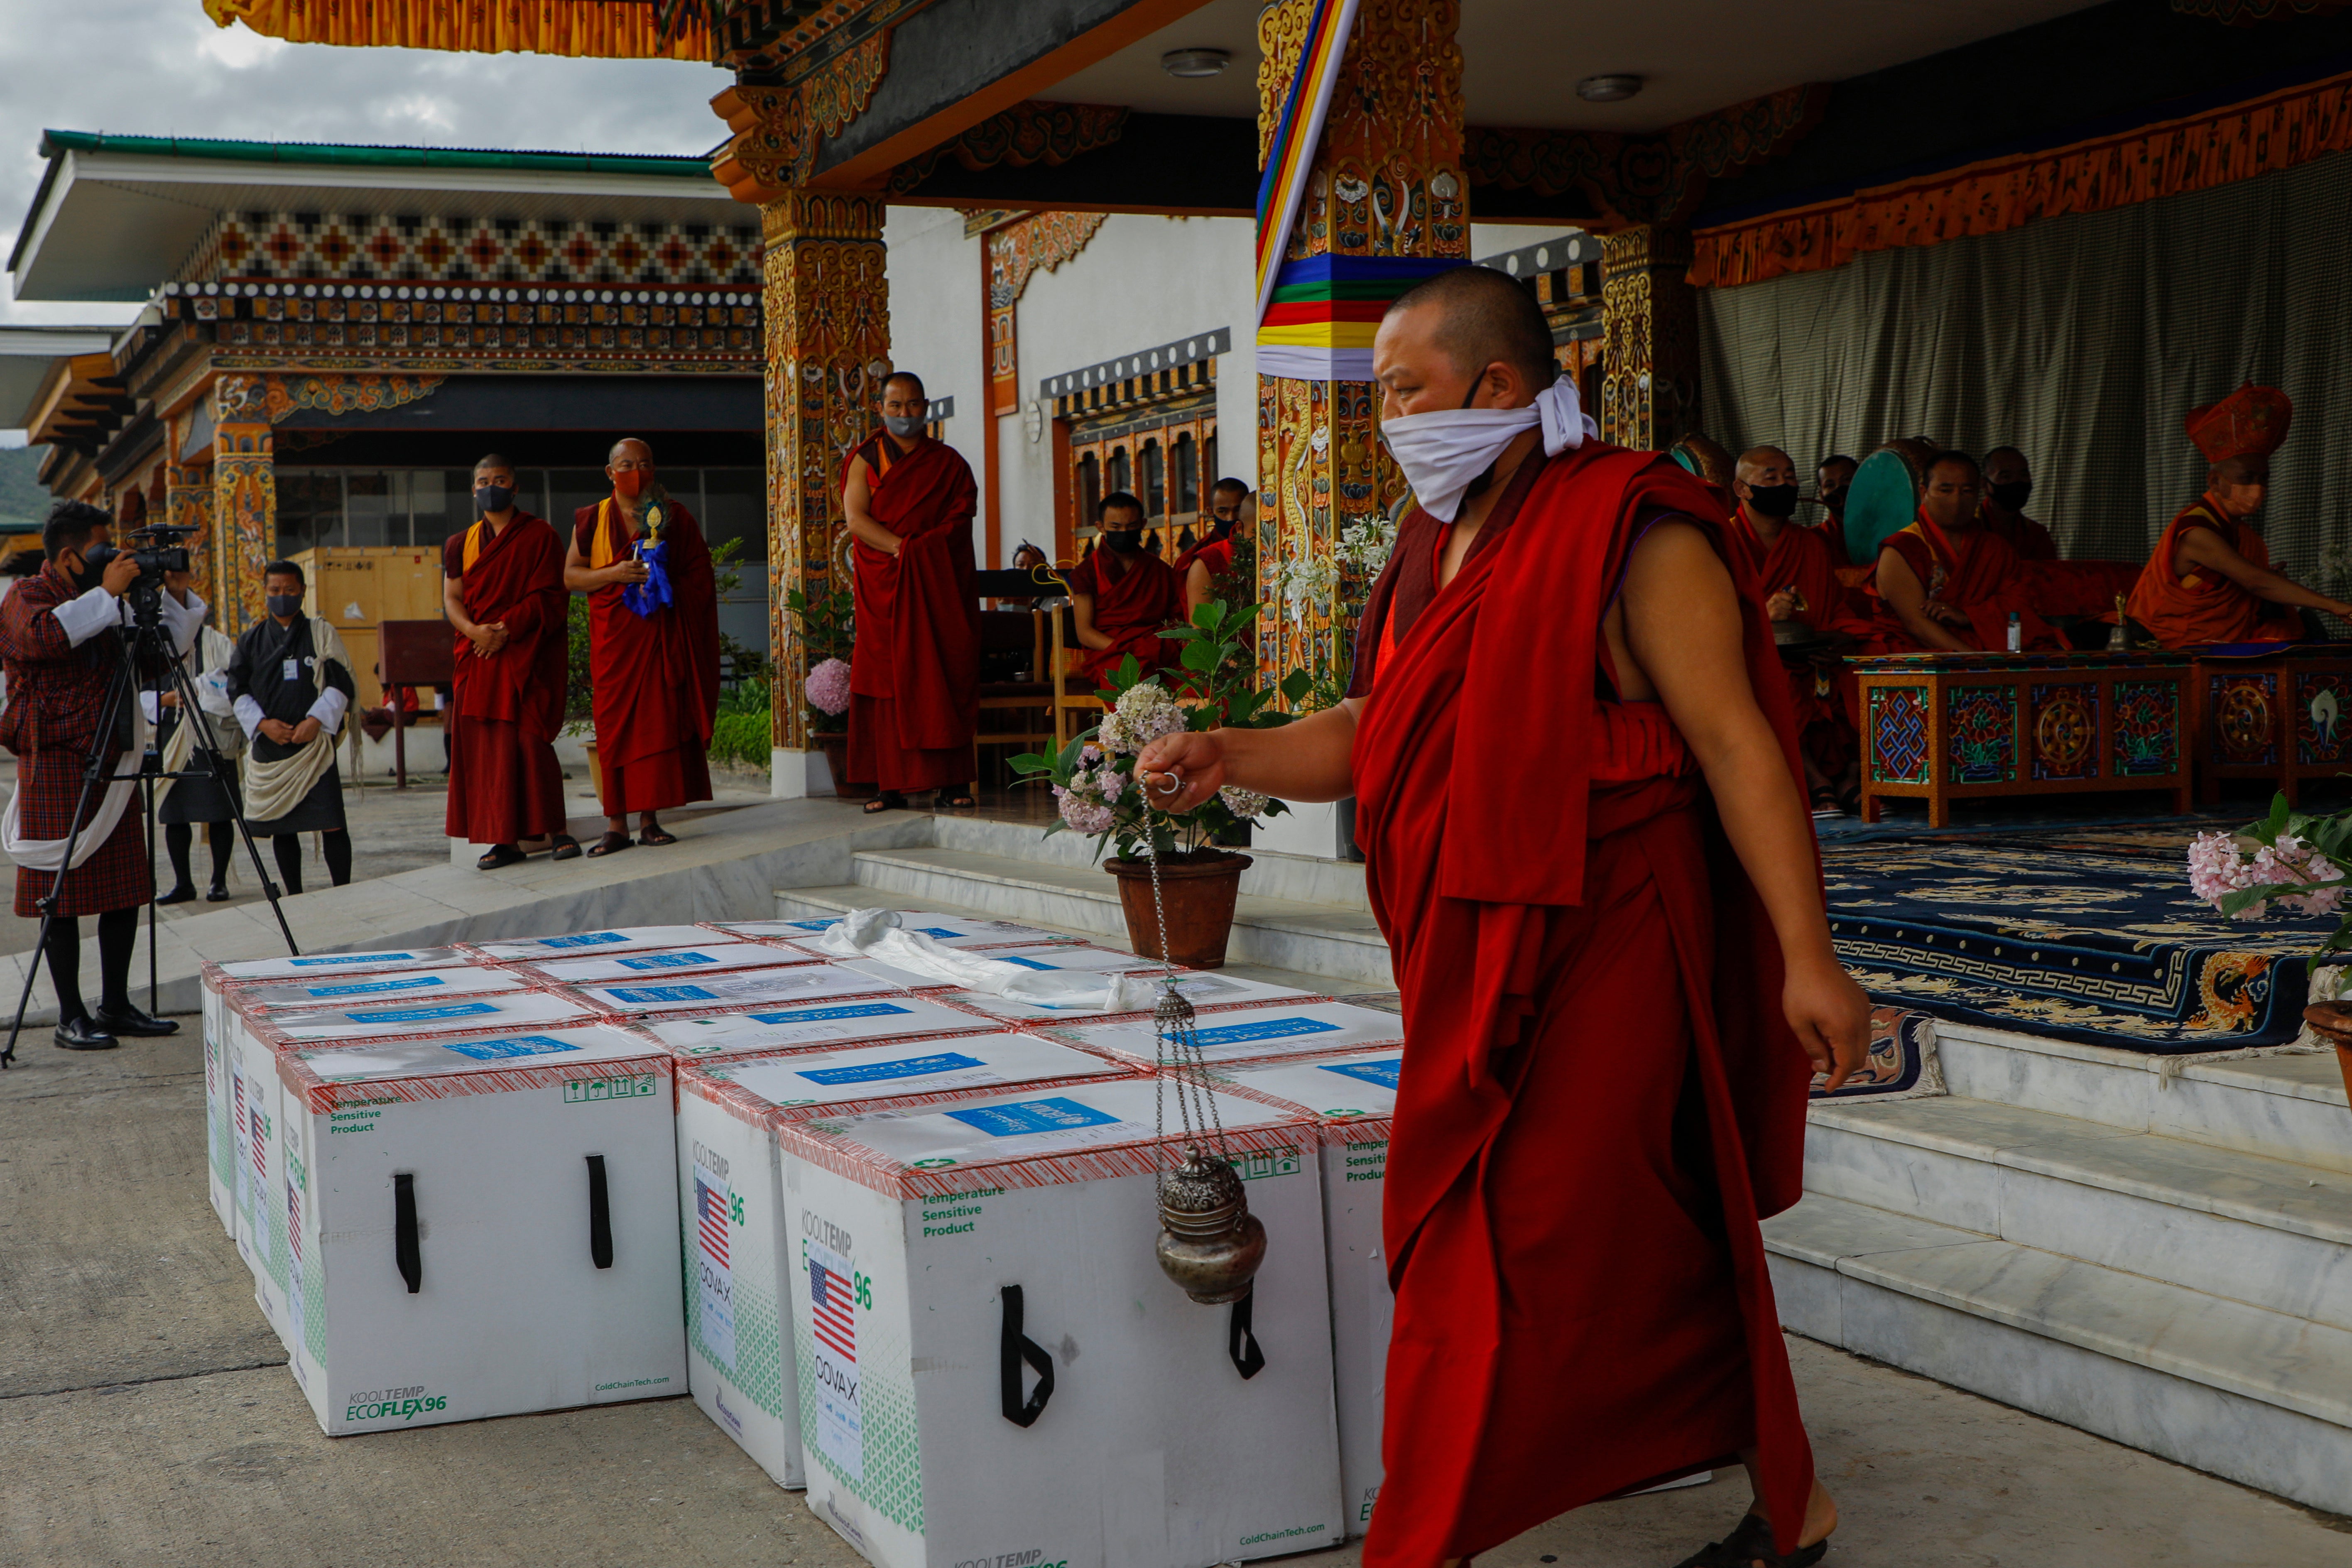 This photograph provided by Unicef shows monks from Paro’s monastic body performing a ritual as 500,000 doses of Moderna vaccine gifted from the United States arrive at Paro International